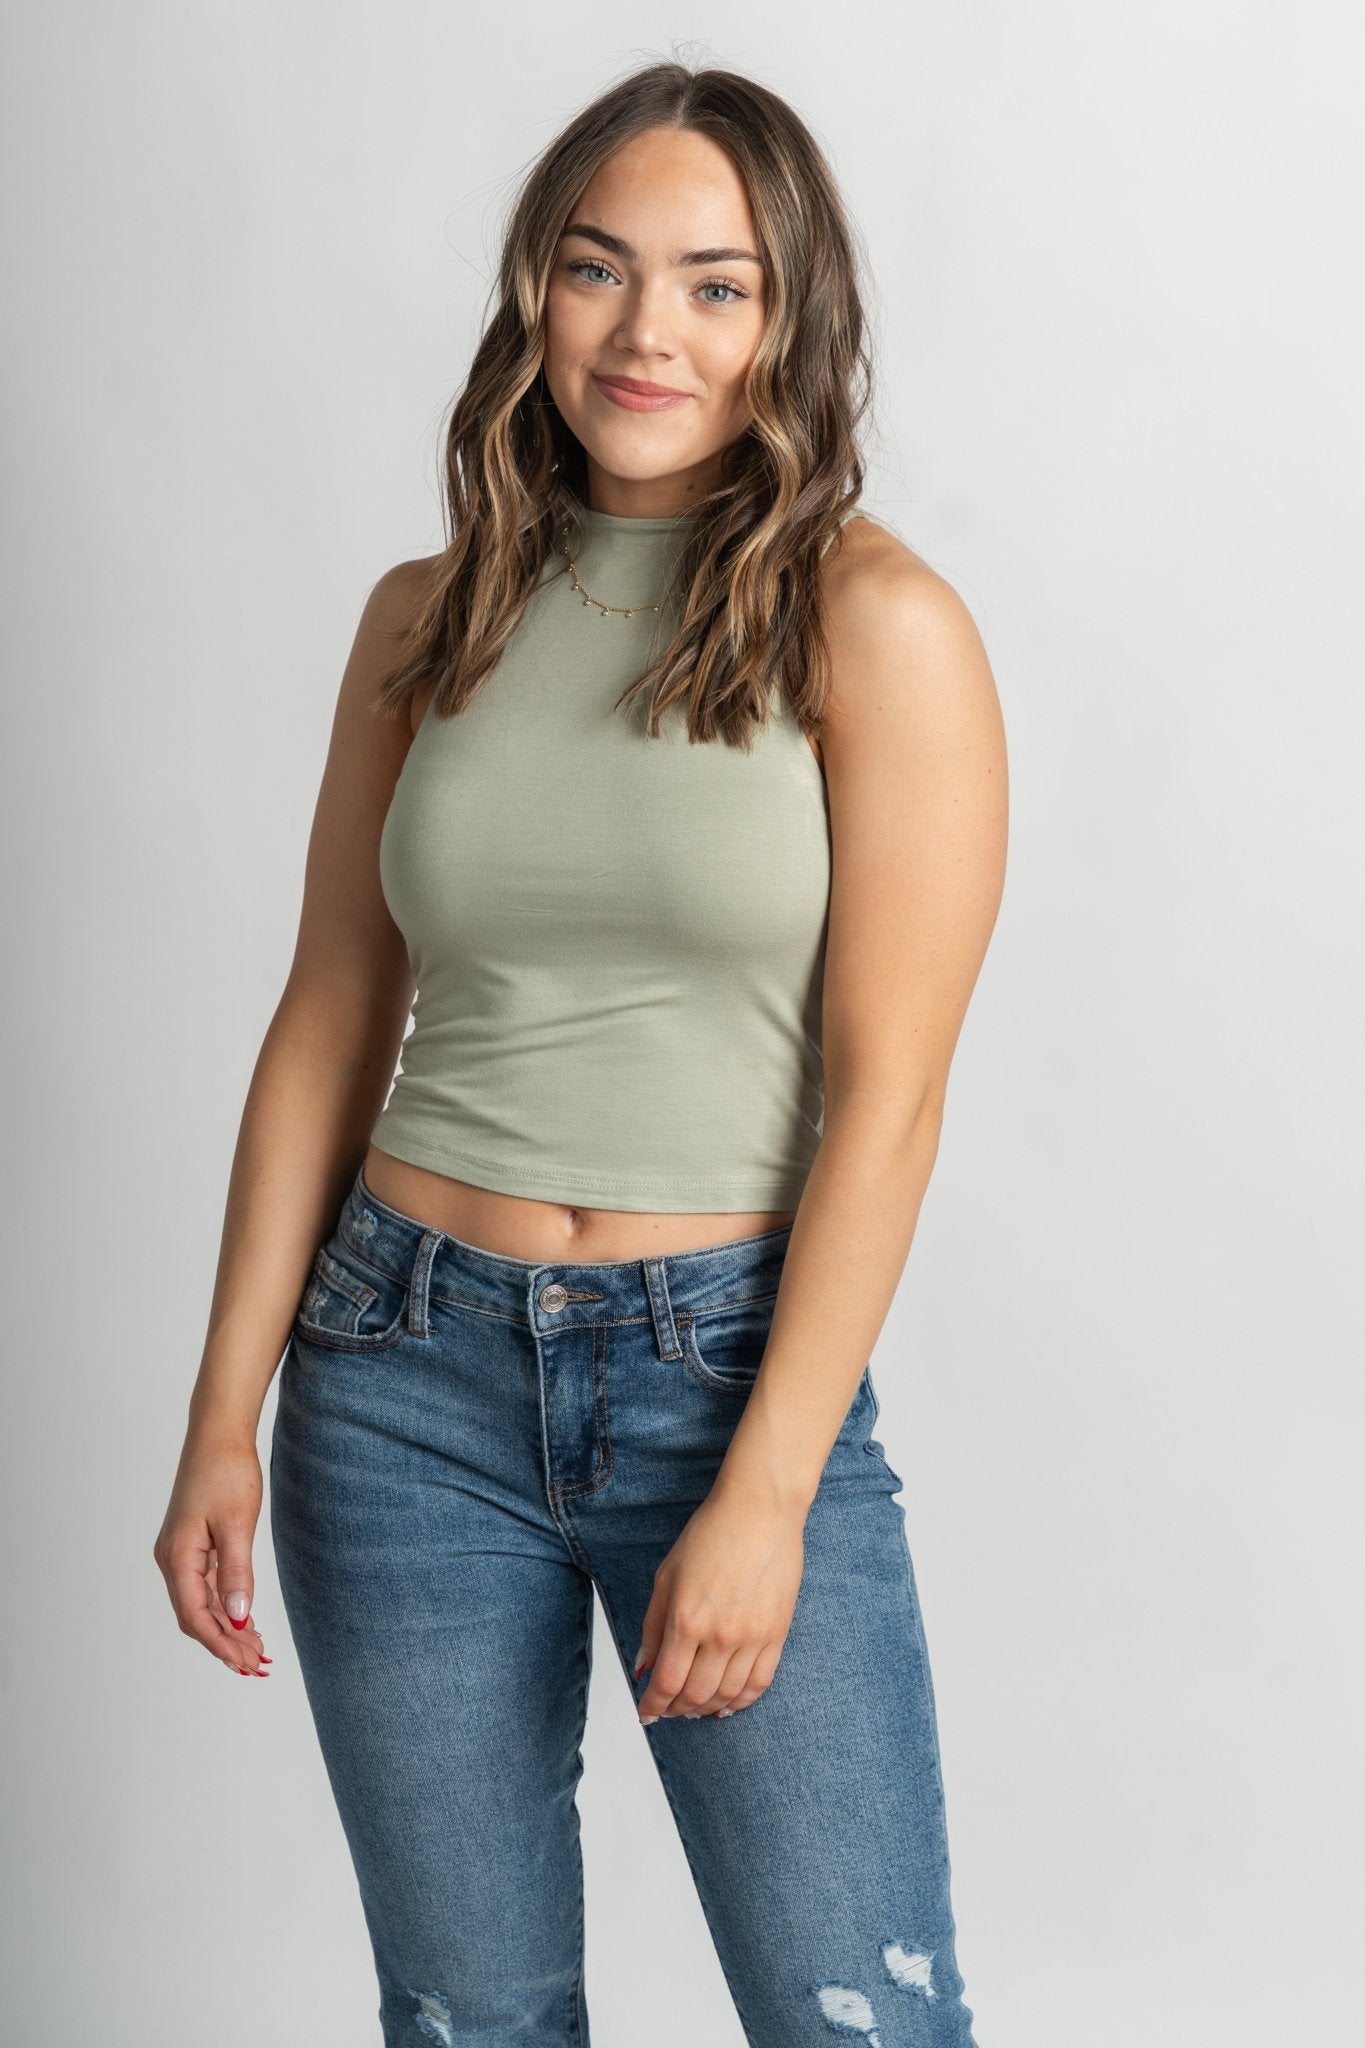 Modal high neck tank top sage - Affordable Tank Top - Boutique Tank Tops at Lush Fashion Lounge Boutique in Oklahoma City